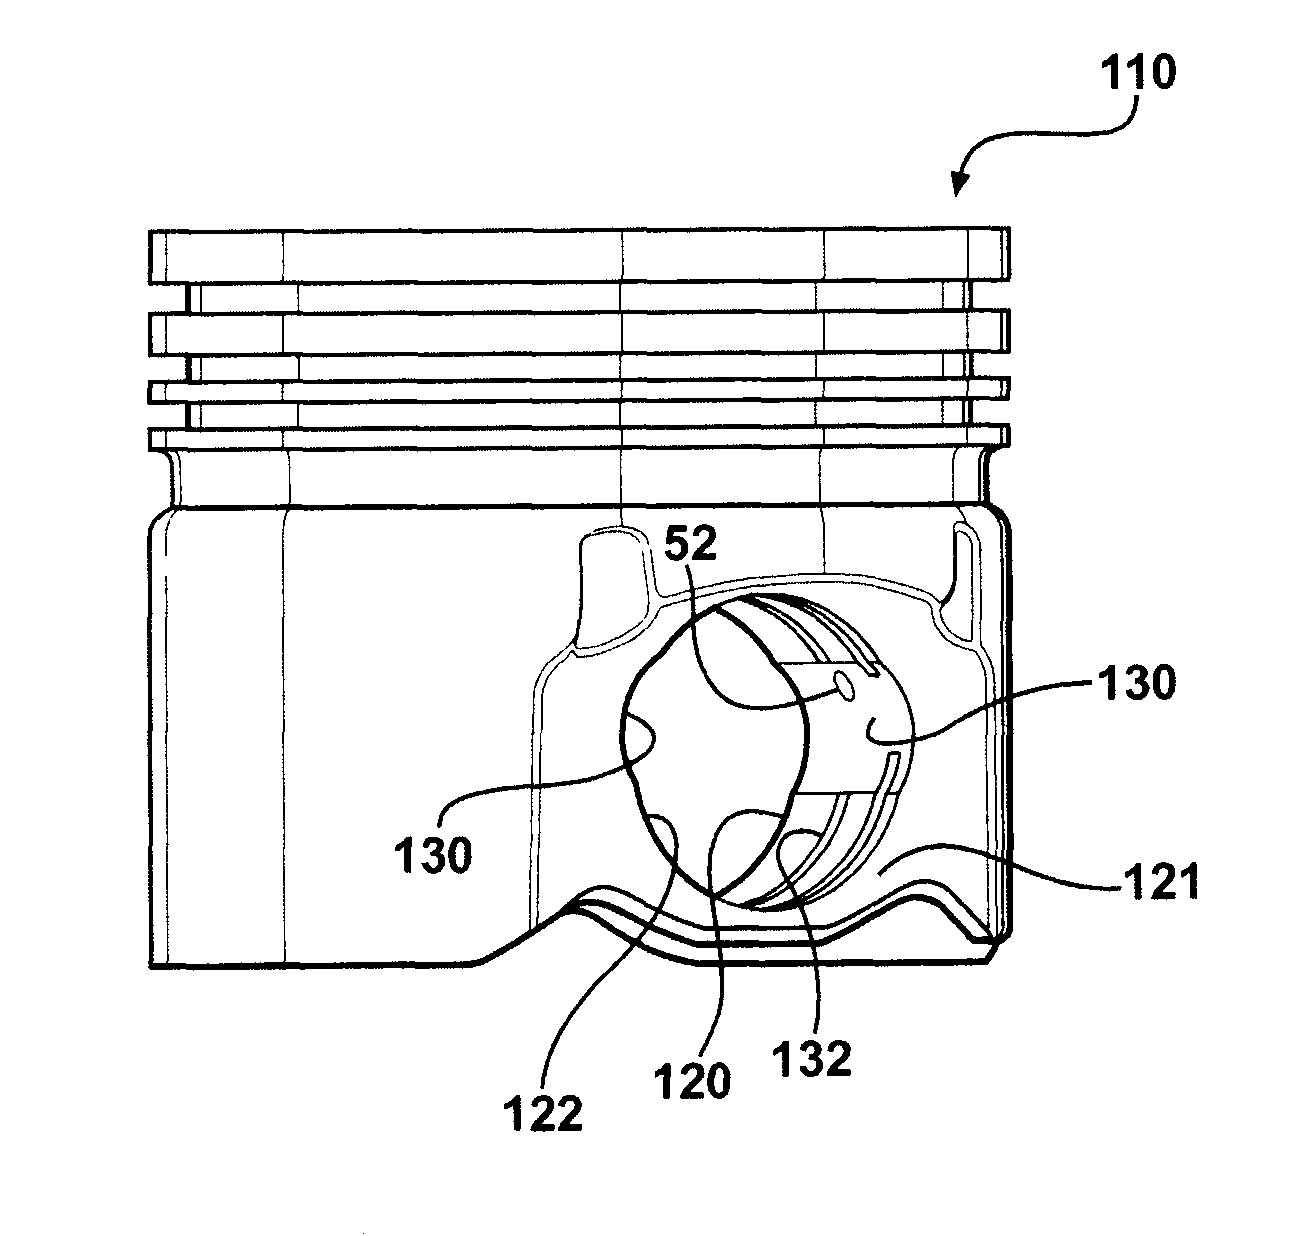 Piston with pin bore lubrication features